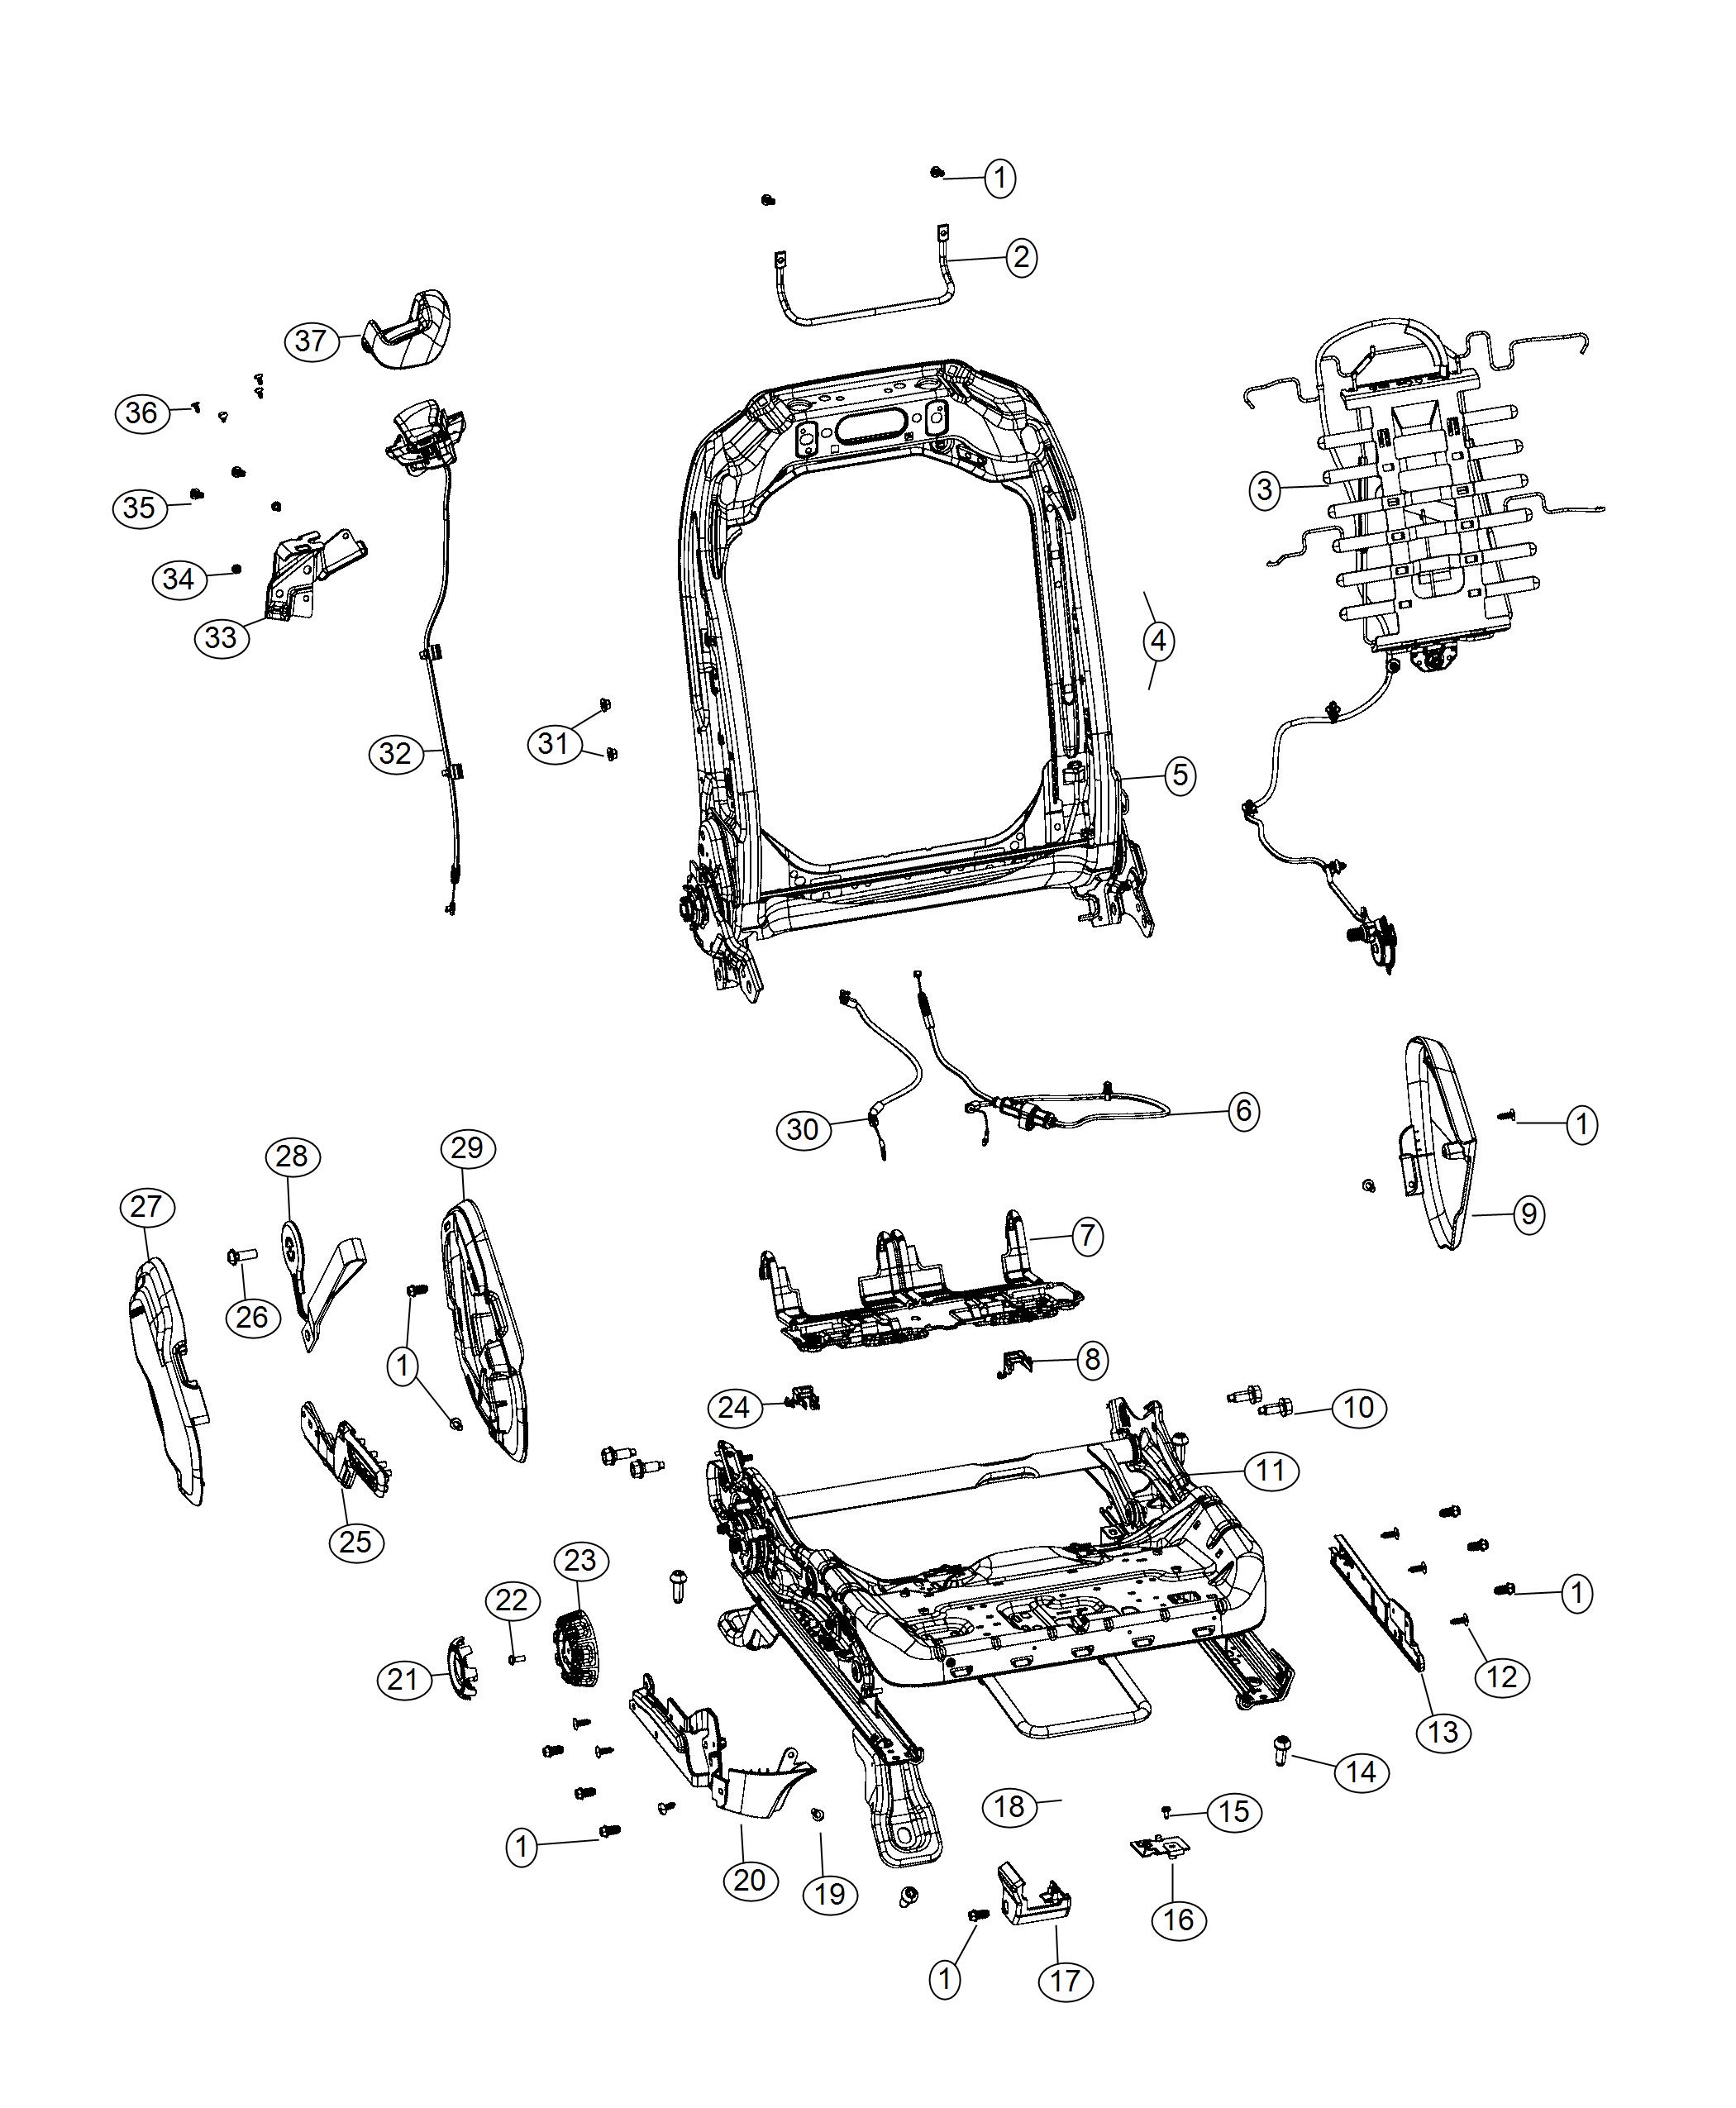 Adjusters, Recliners, Shields and Risers - Driver Seat - 72 Body. Diagram